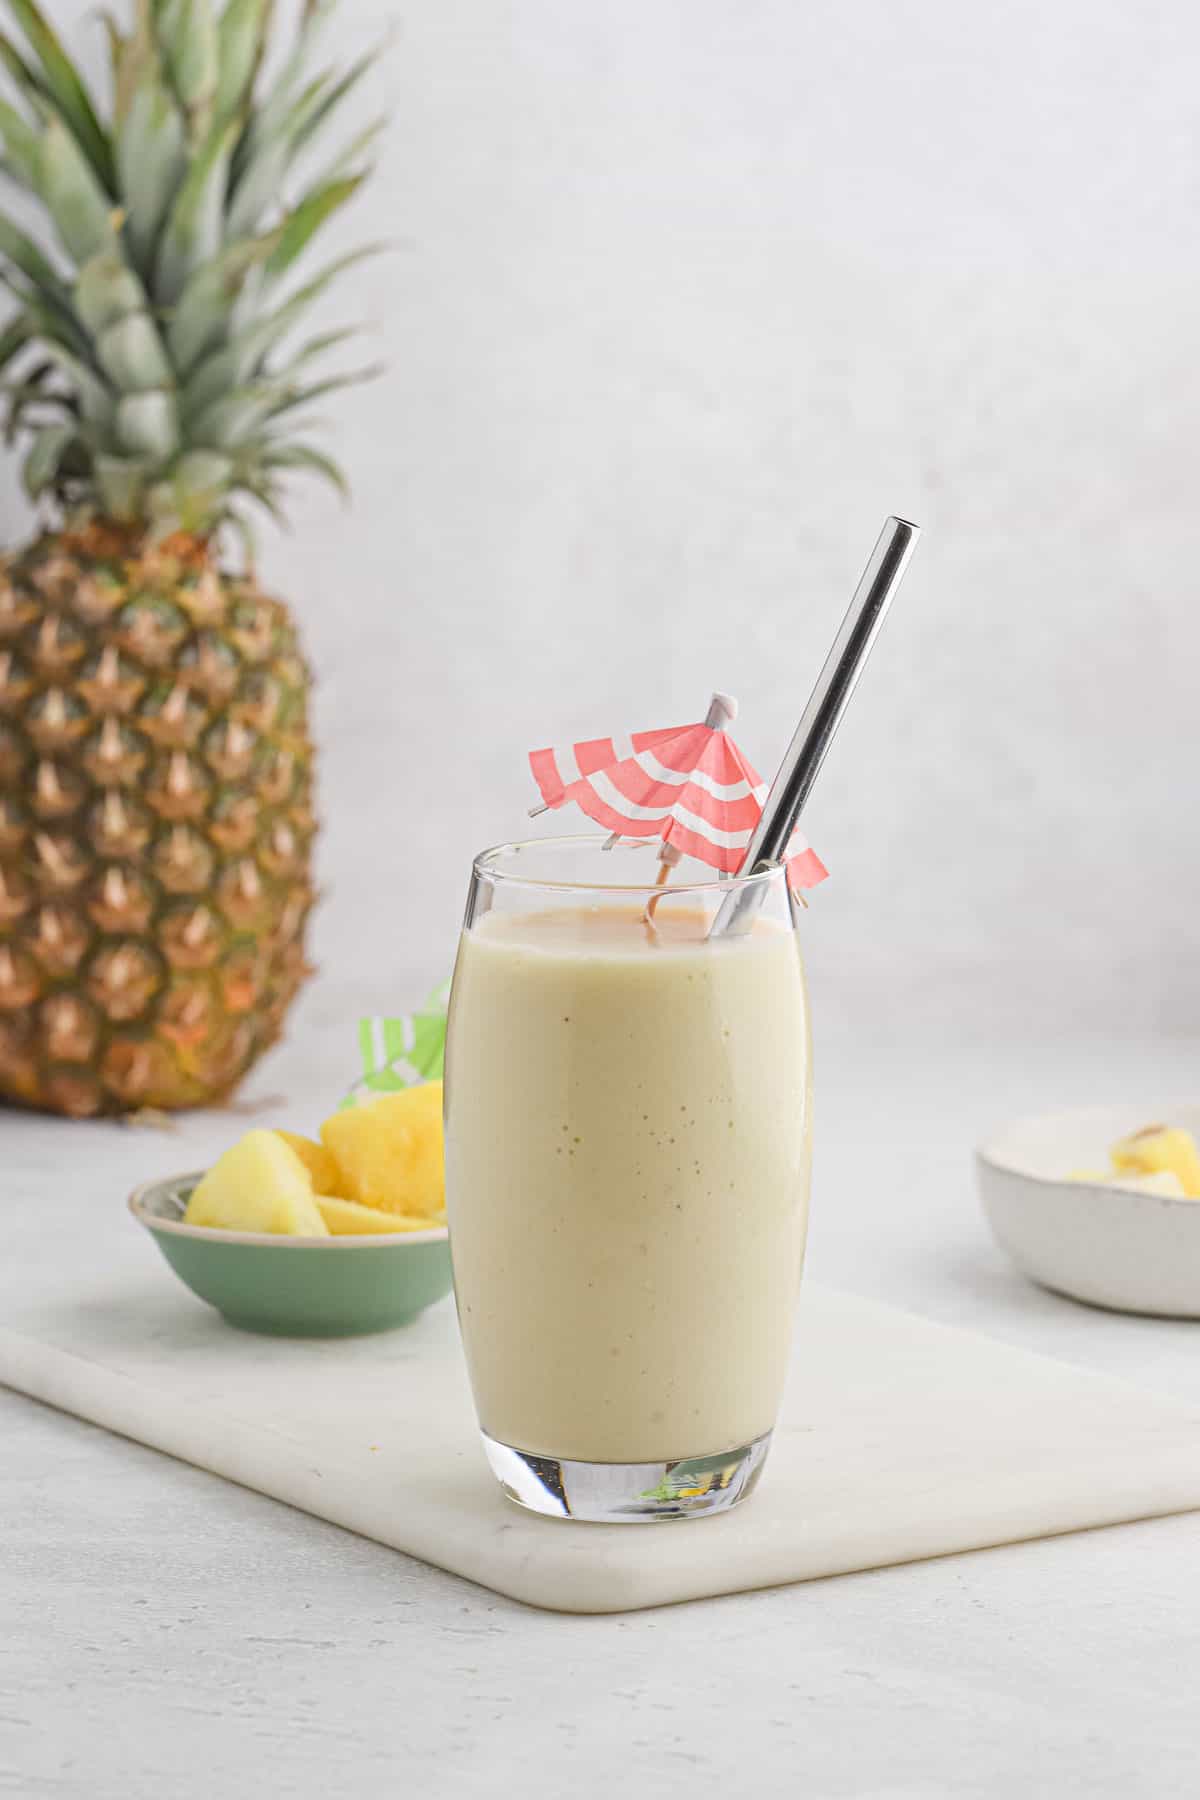 Pina colada smoothie in a glass with a pineapple in the background.